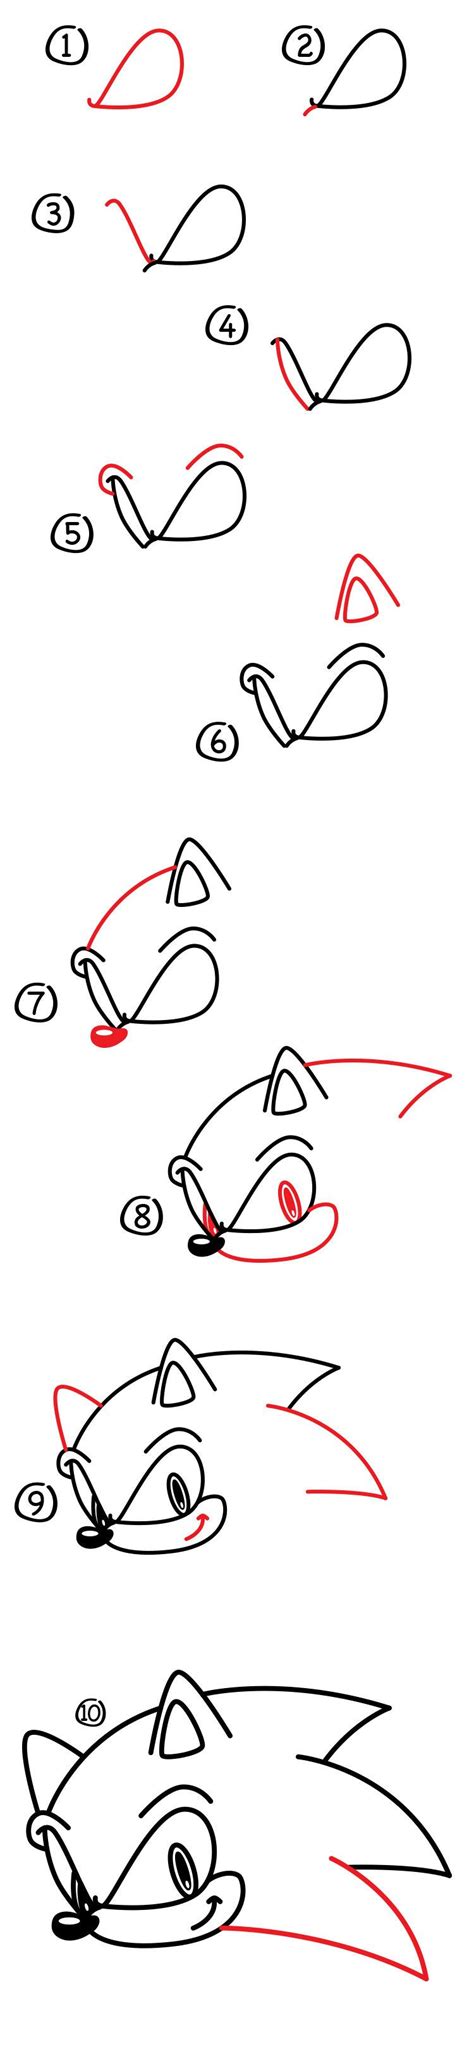 How To Draw Sonic The Hedgehog Art For Kids Hub Fun To Try How